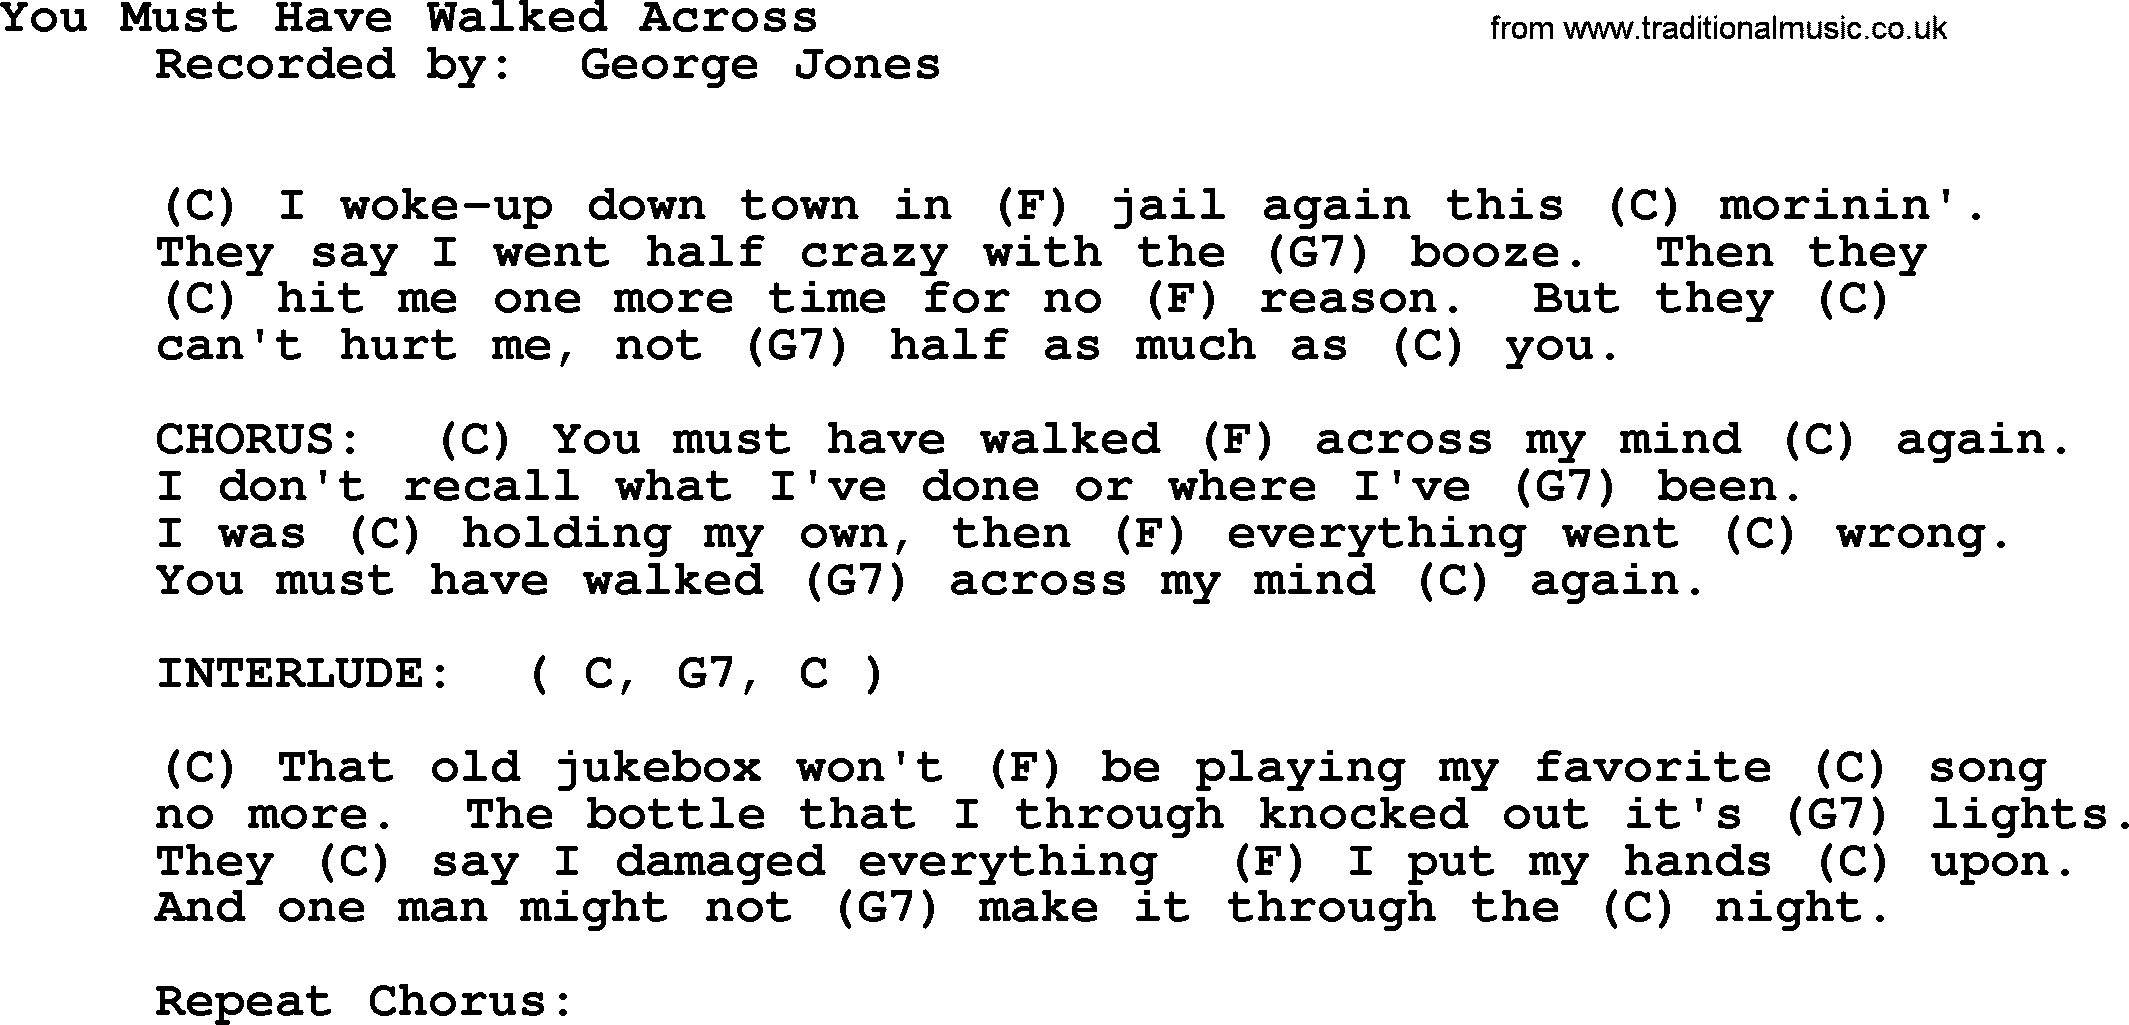 George Jones song: You Must Have Walked Across, lyrics and chords